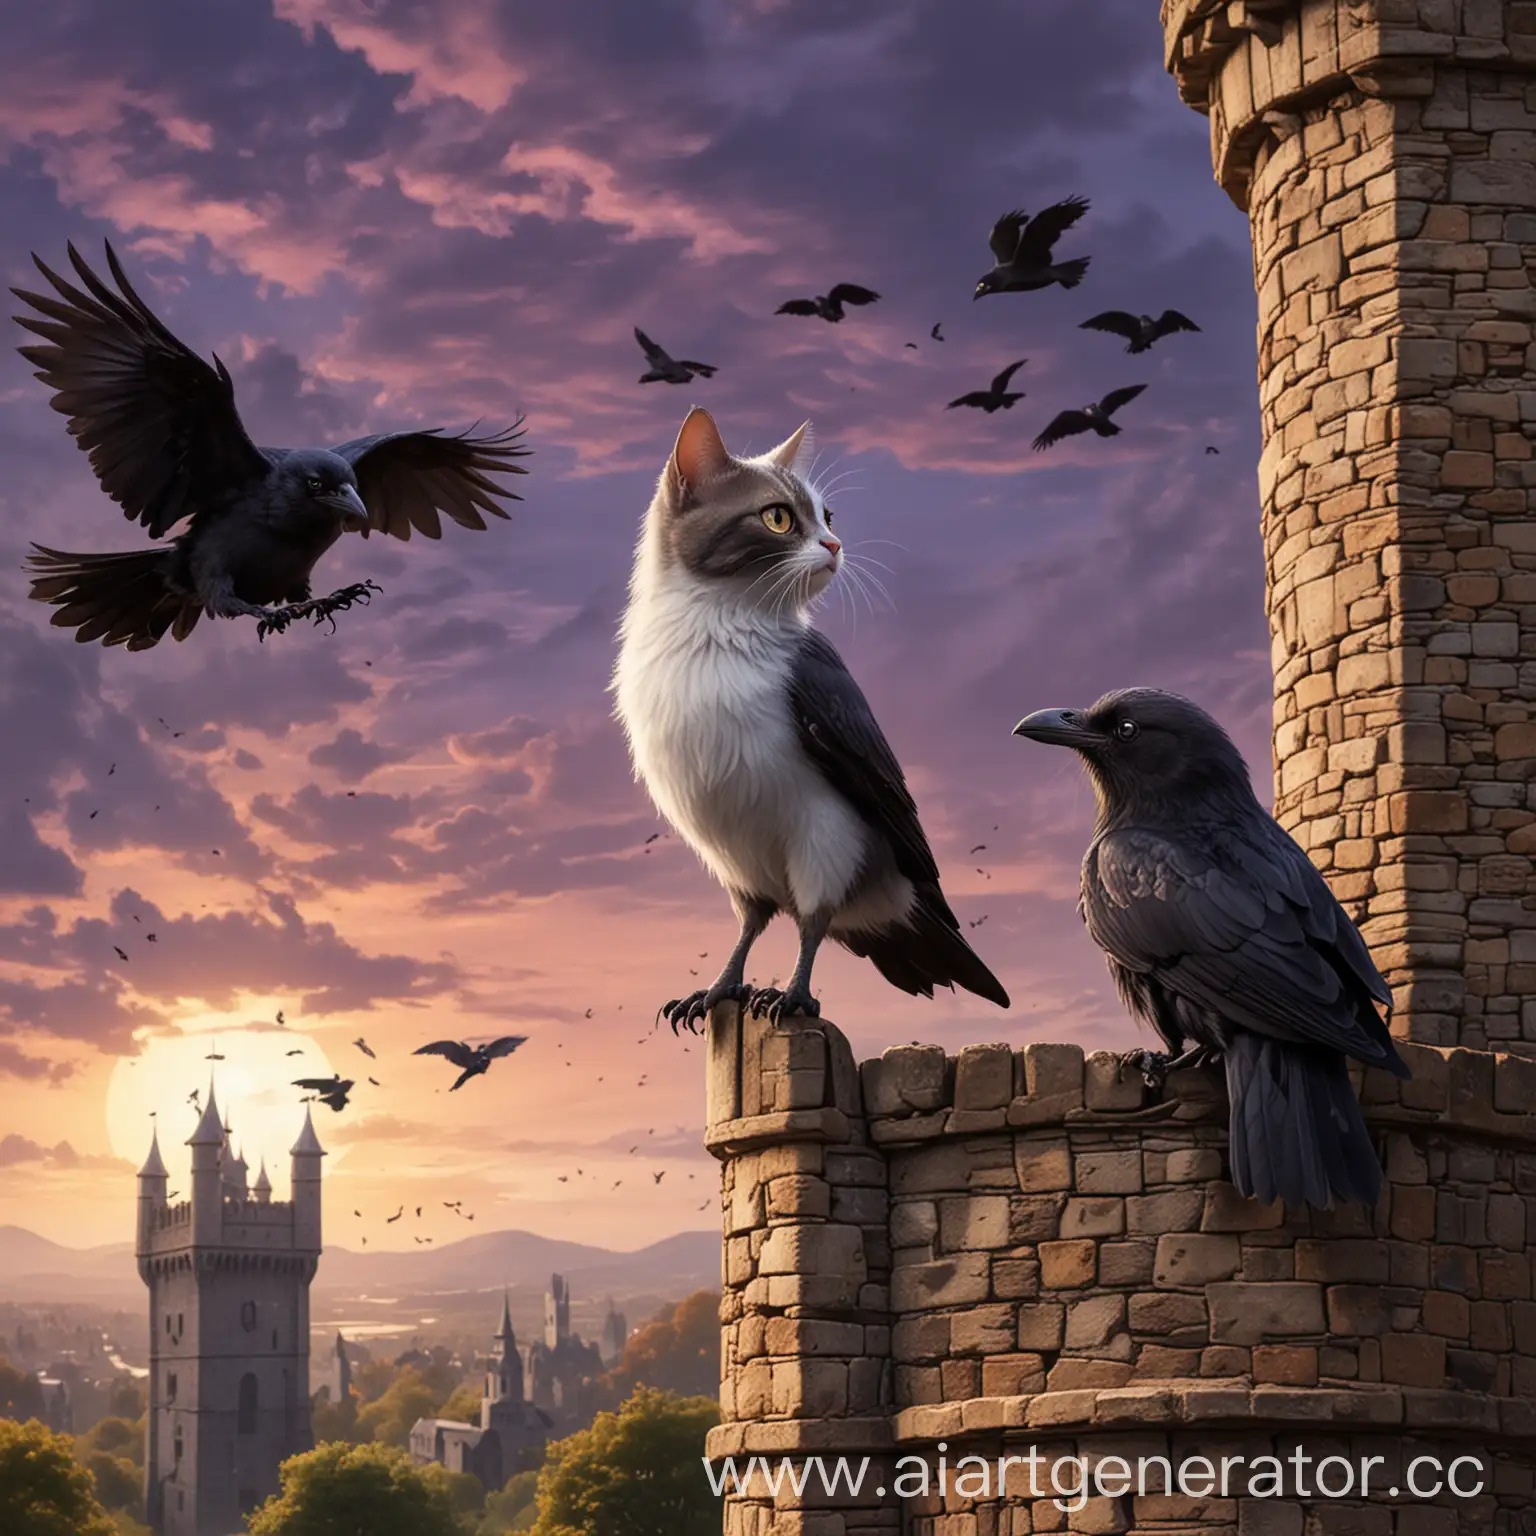 Curious-Little-Cat-Mew-Mew-Encounters-Ravens-in-Tower